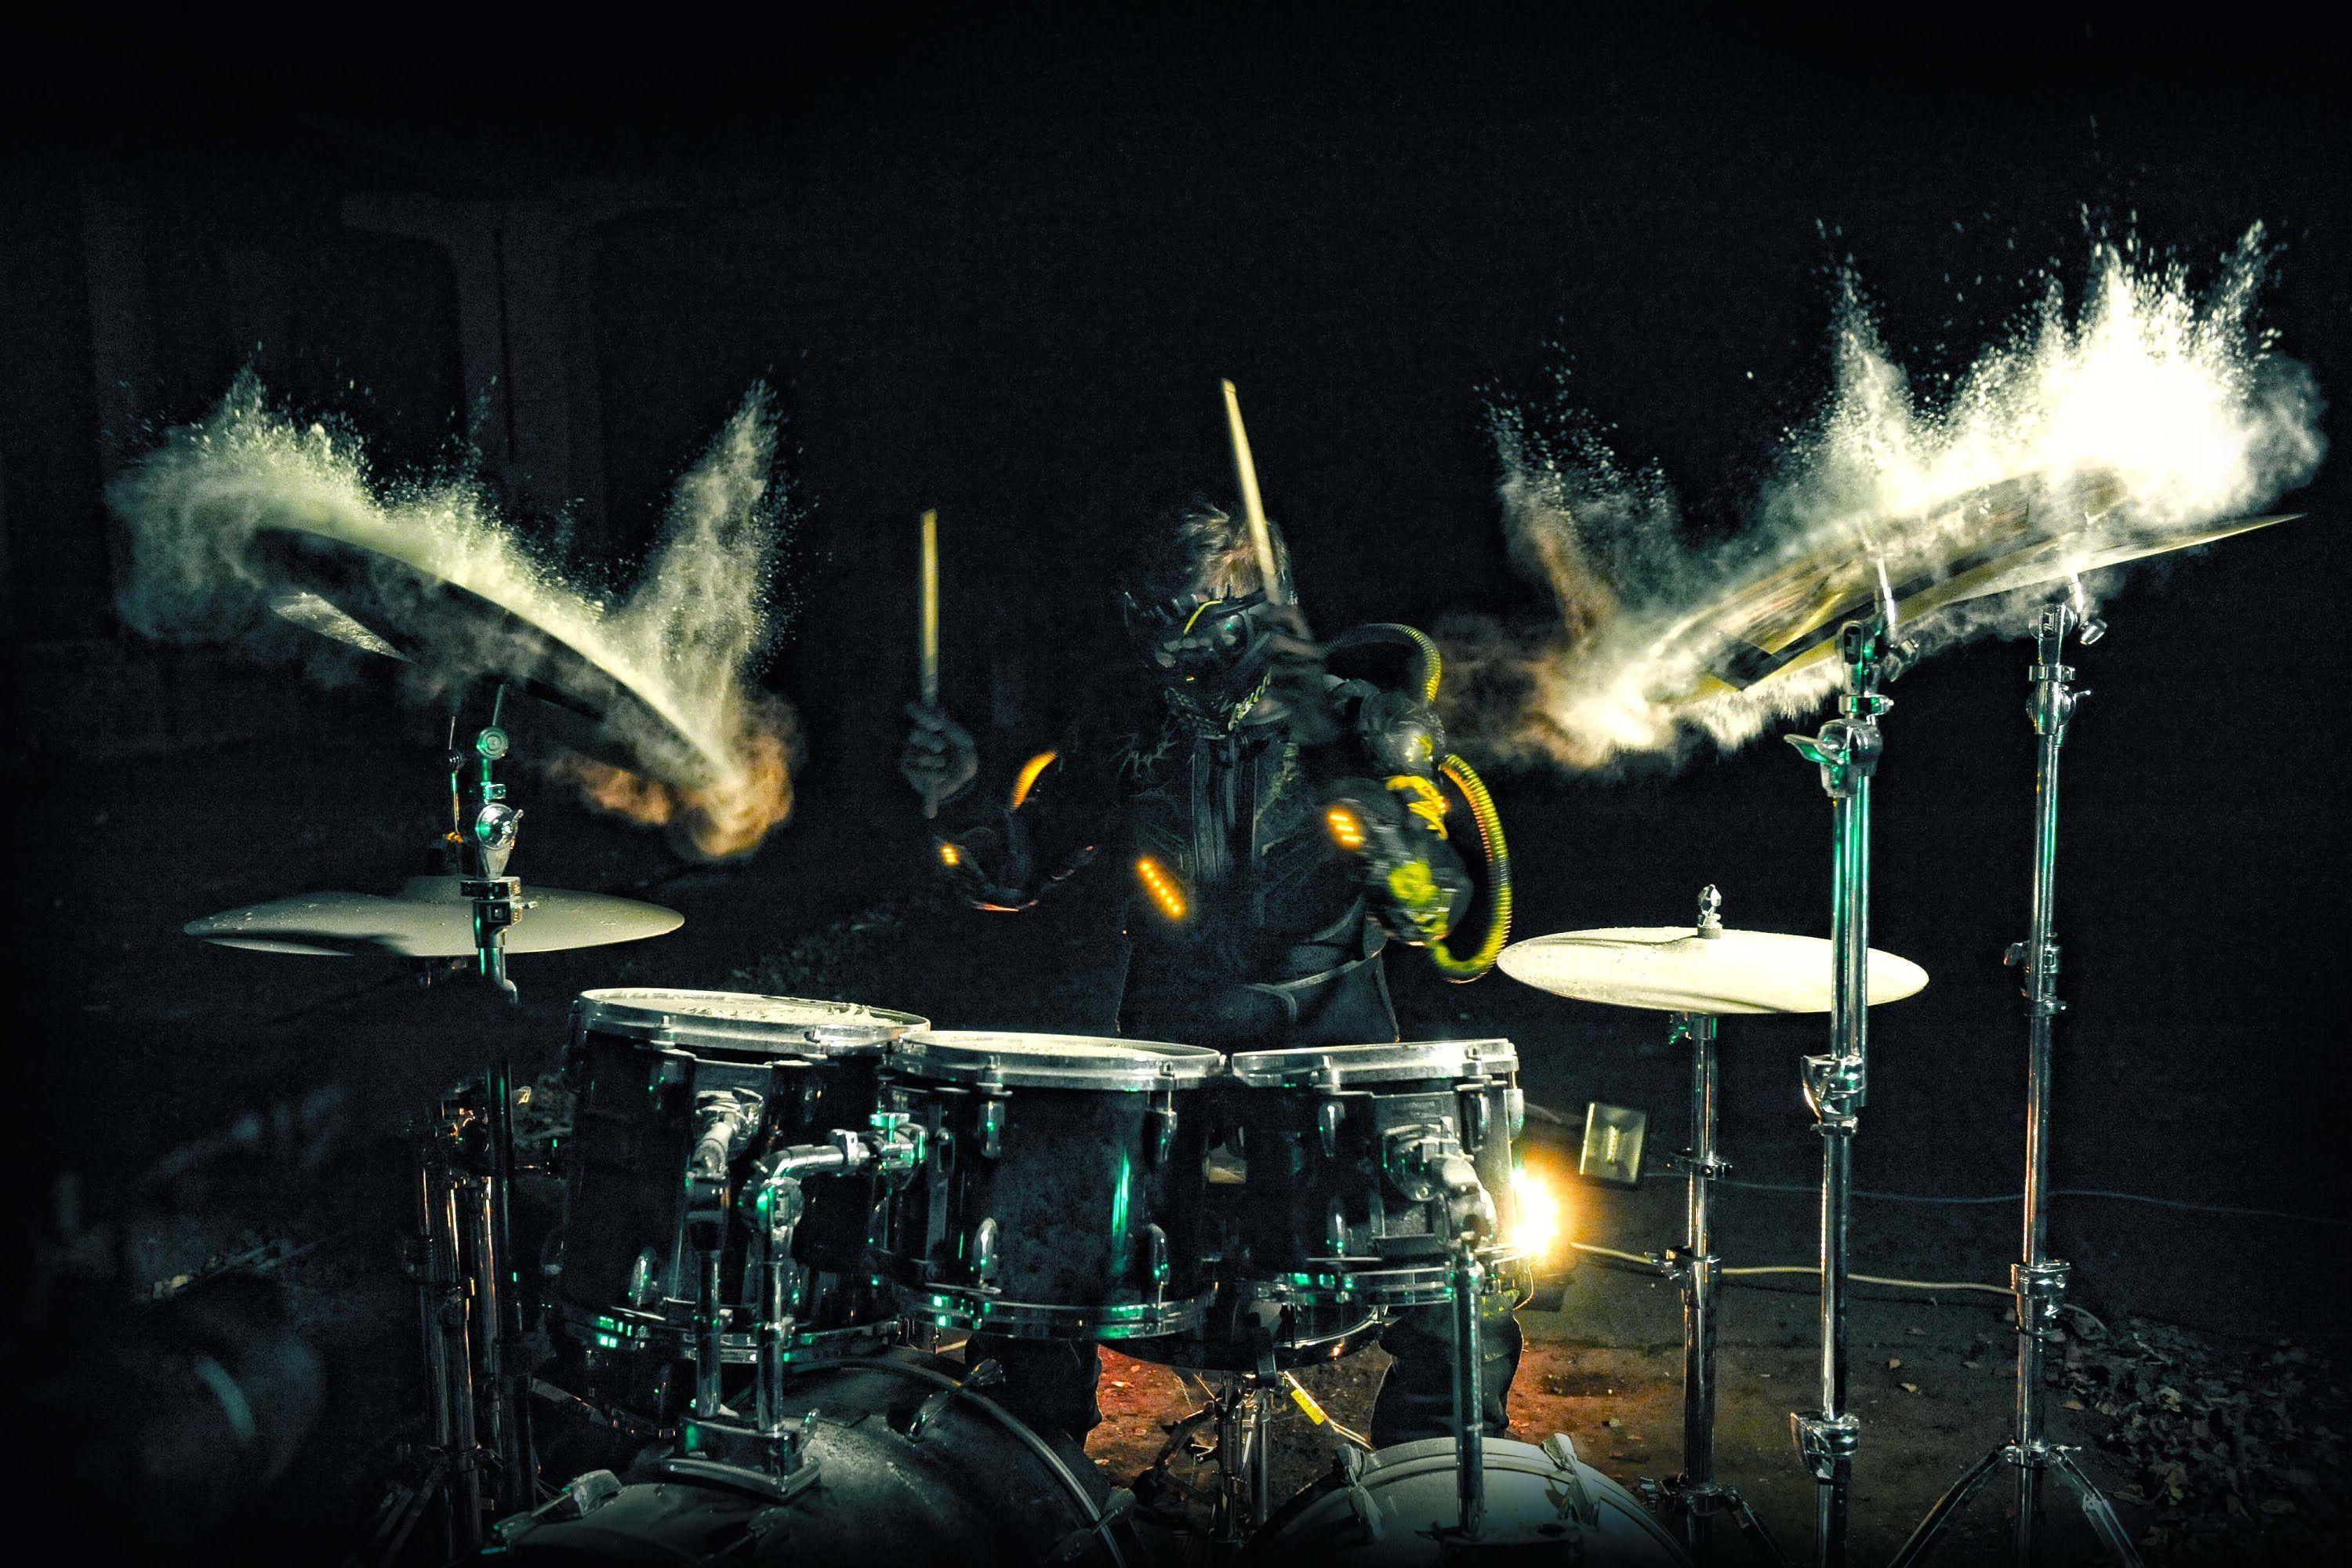 Drummer playing a dusty drumkit, to create a dramatic effect